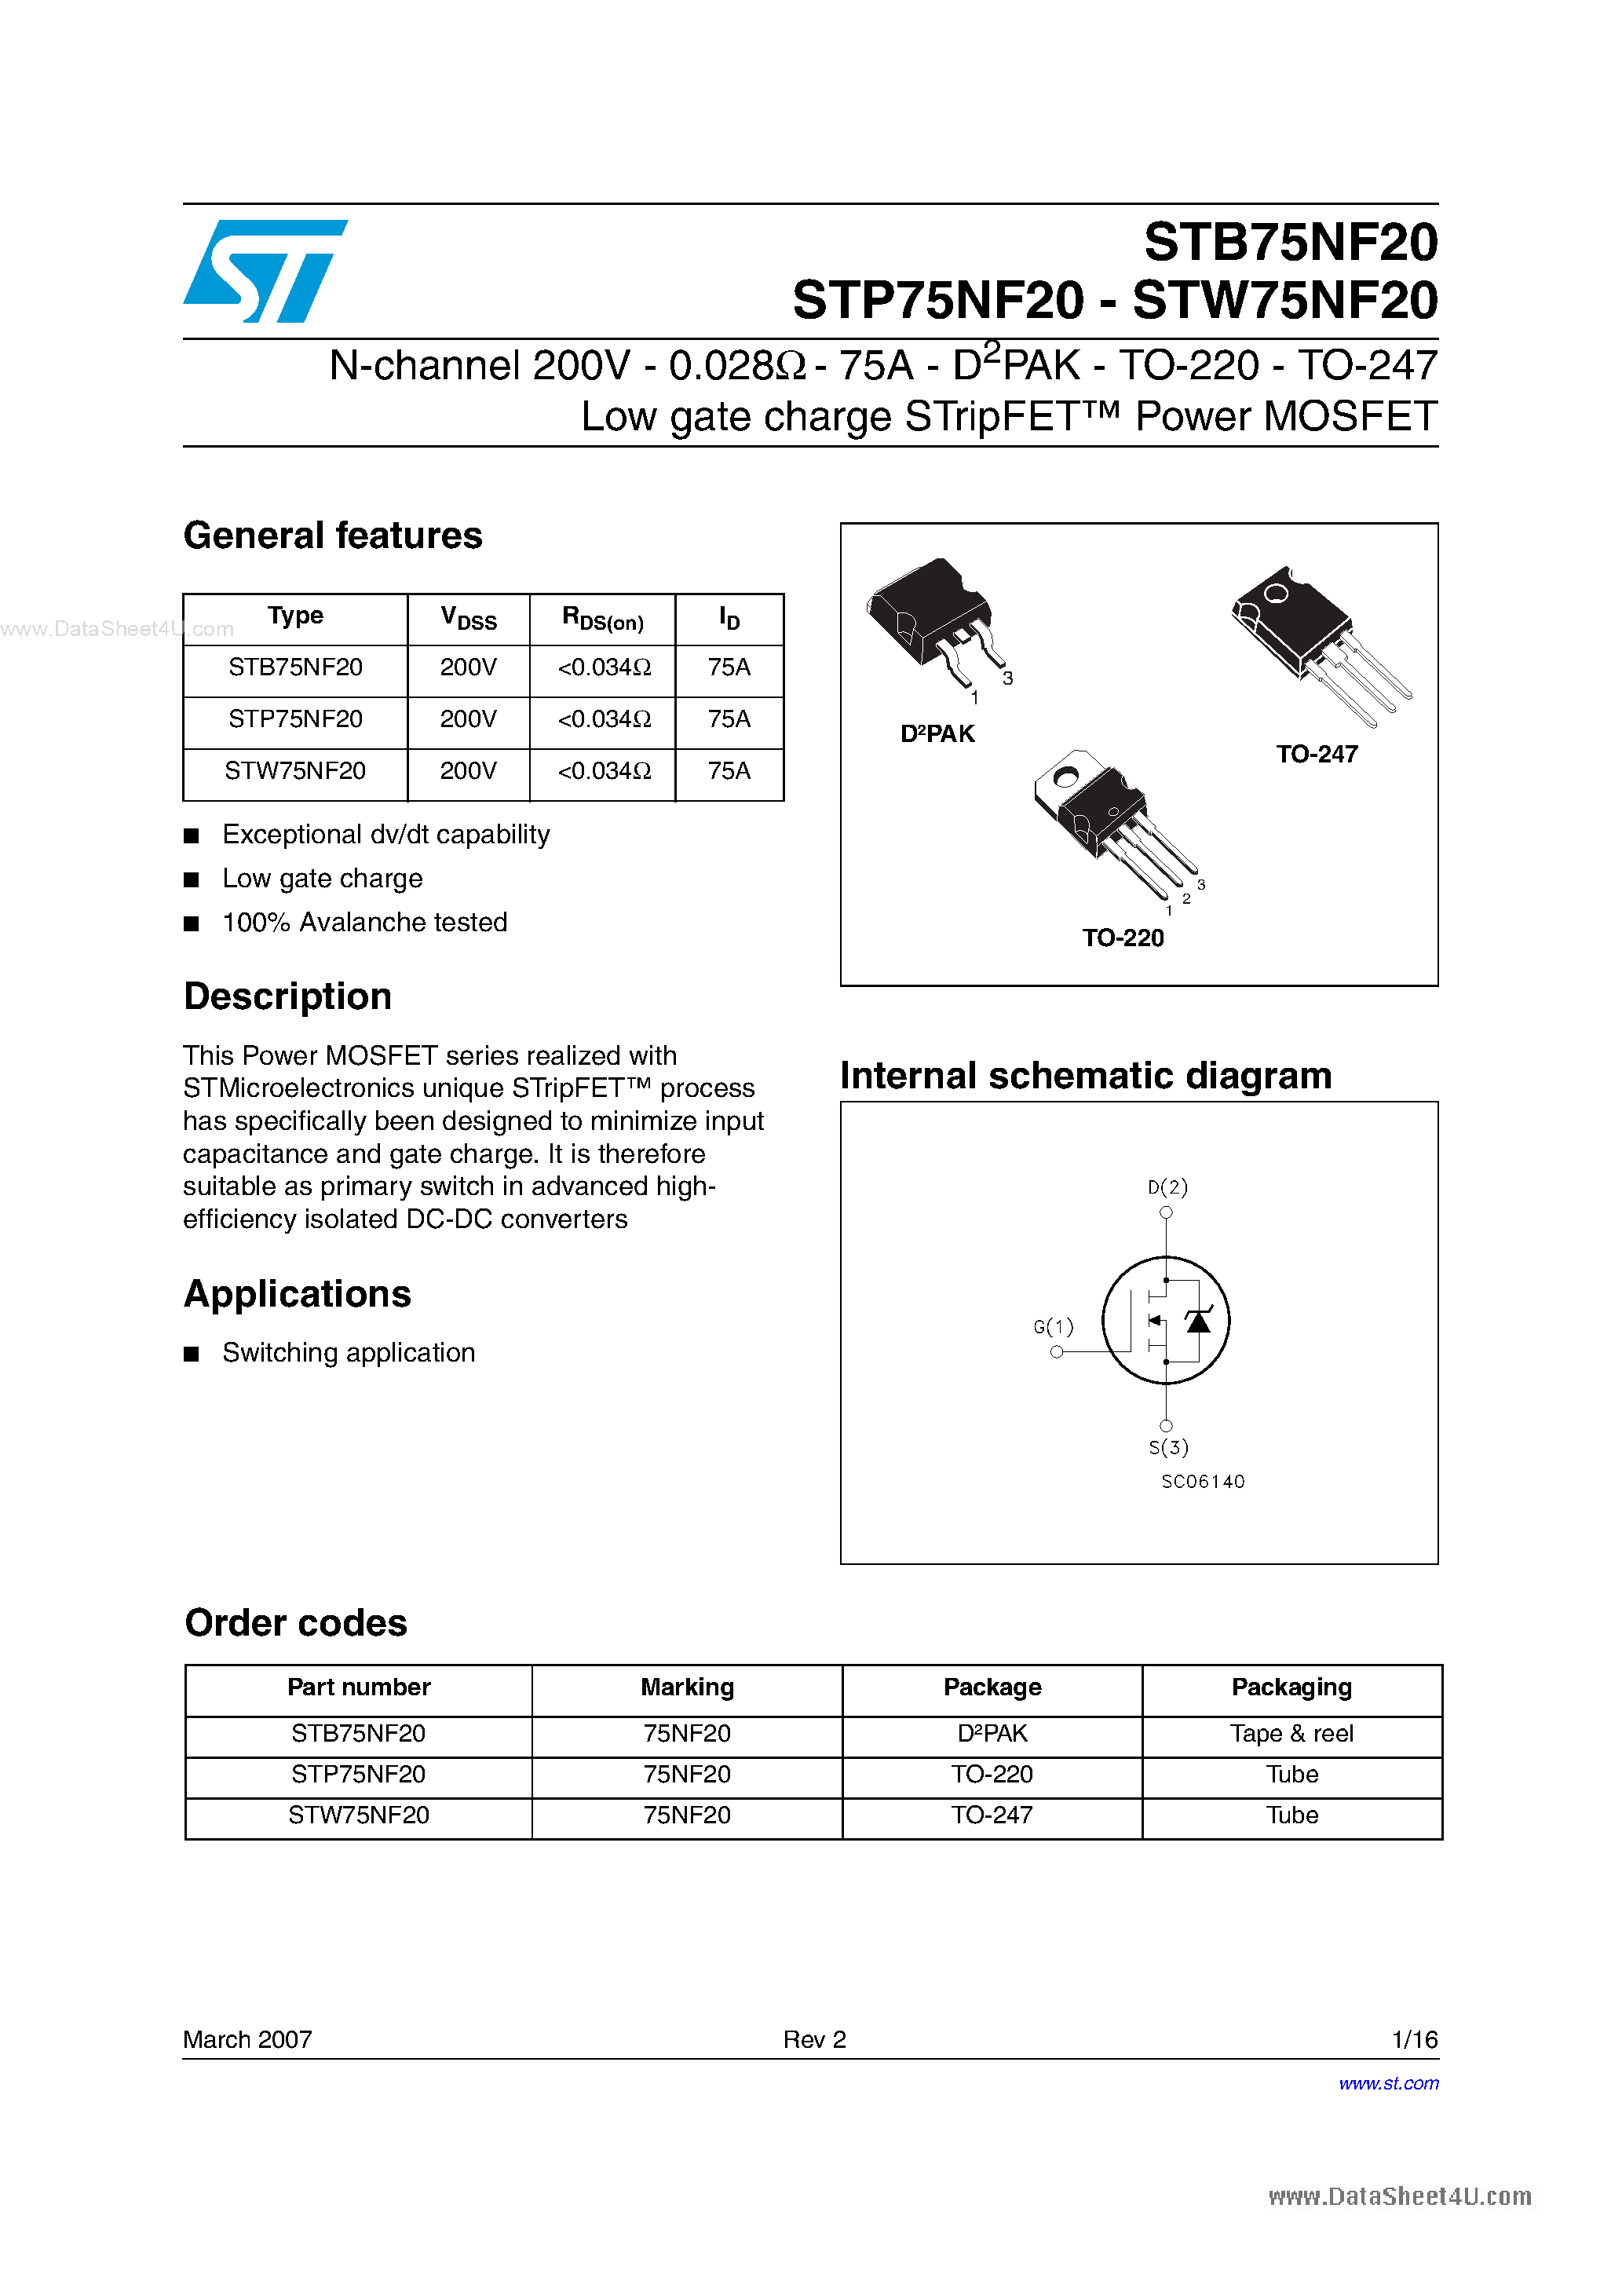 Даташит STB75NF20-N-channel Power MOSFET страница 1